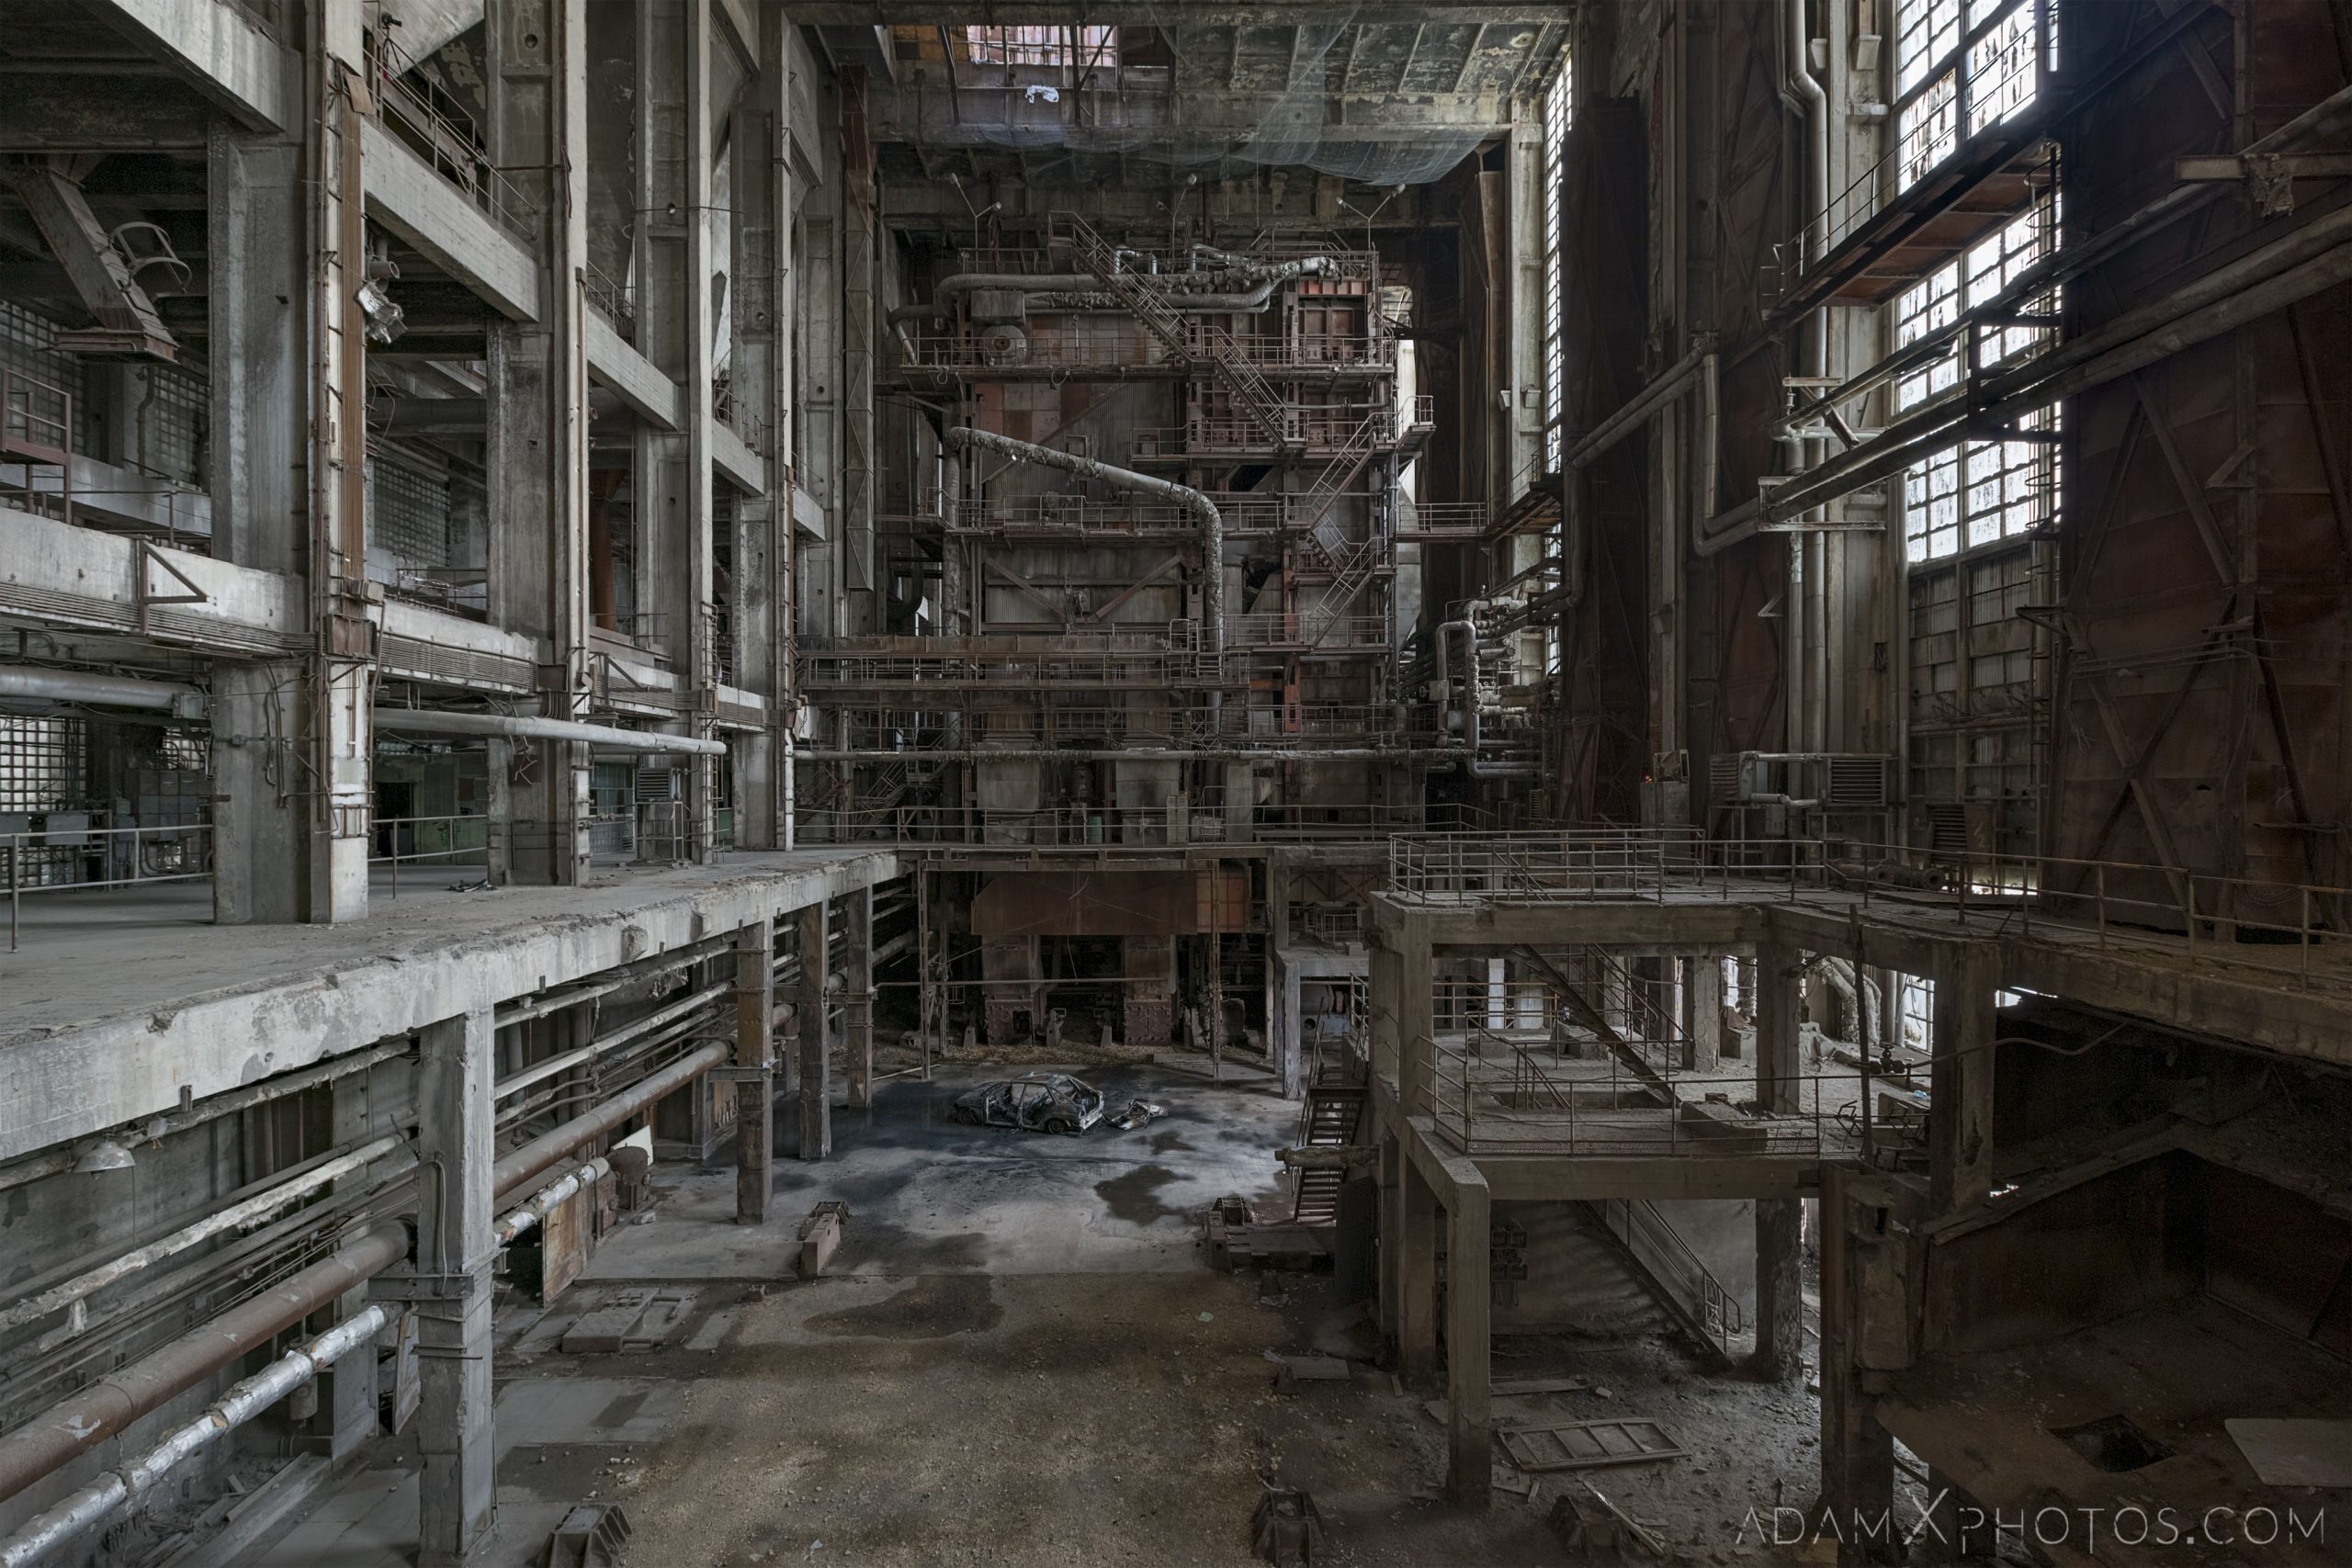 gantries pipes industry industrial rusty rusting Bladerunner Blade Runner 2049 Powerplant Inota Shephard's Power Plant Hungary Adam X Urbex Urban Exploration Access 2018 Abandoned decay ruins lost forgotten derelict location creepy haunting eerie security